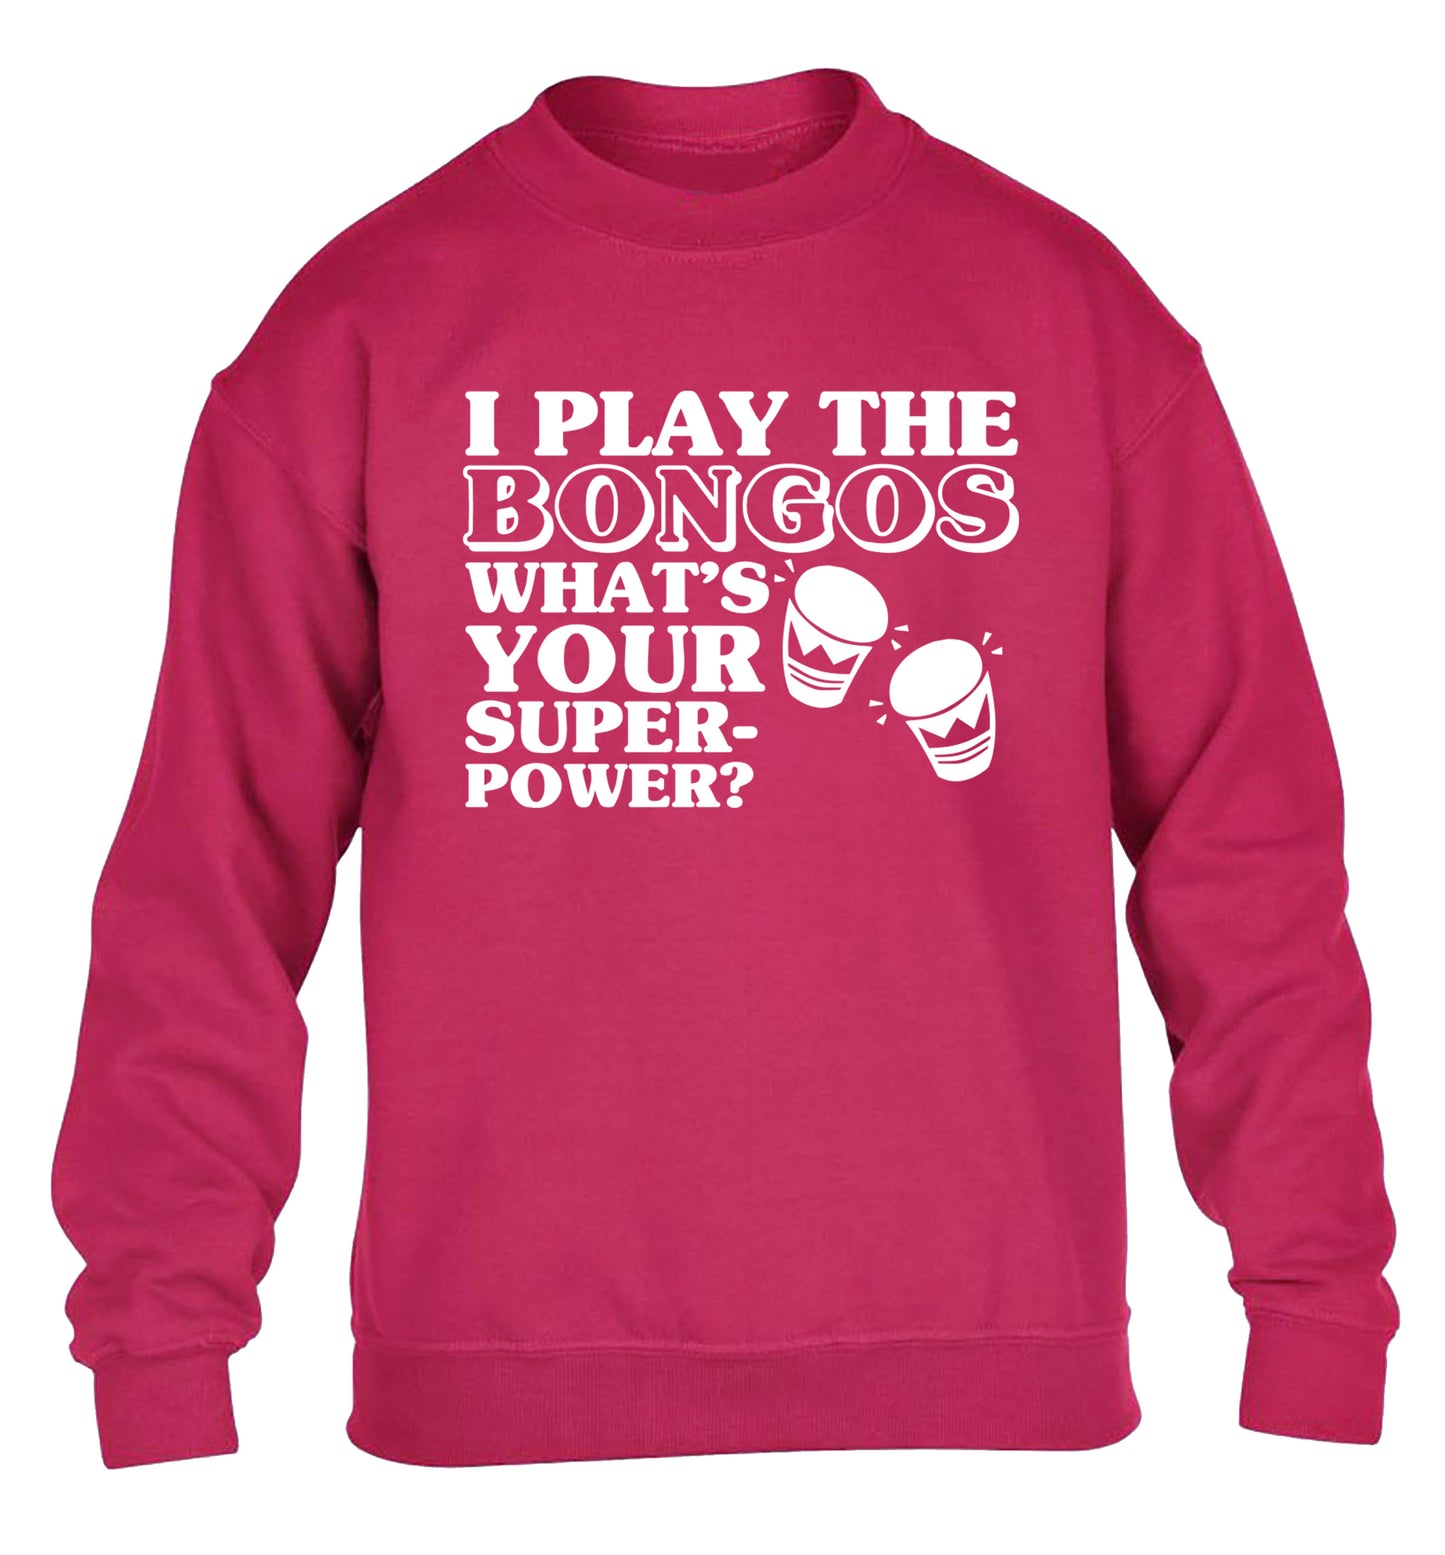 I play the bongos what's your superpower? children's pink sweater 12-14 Years